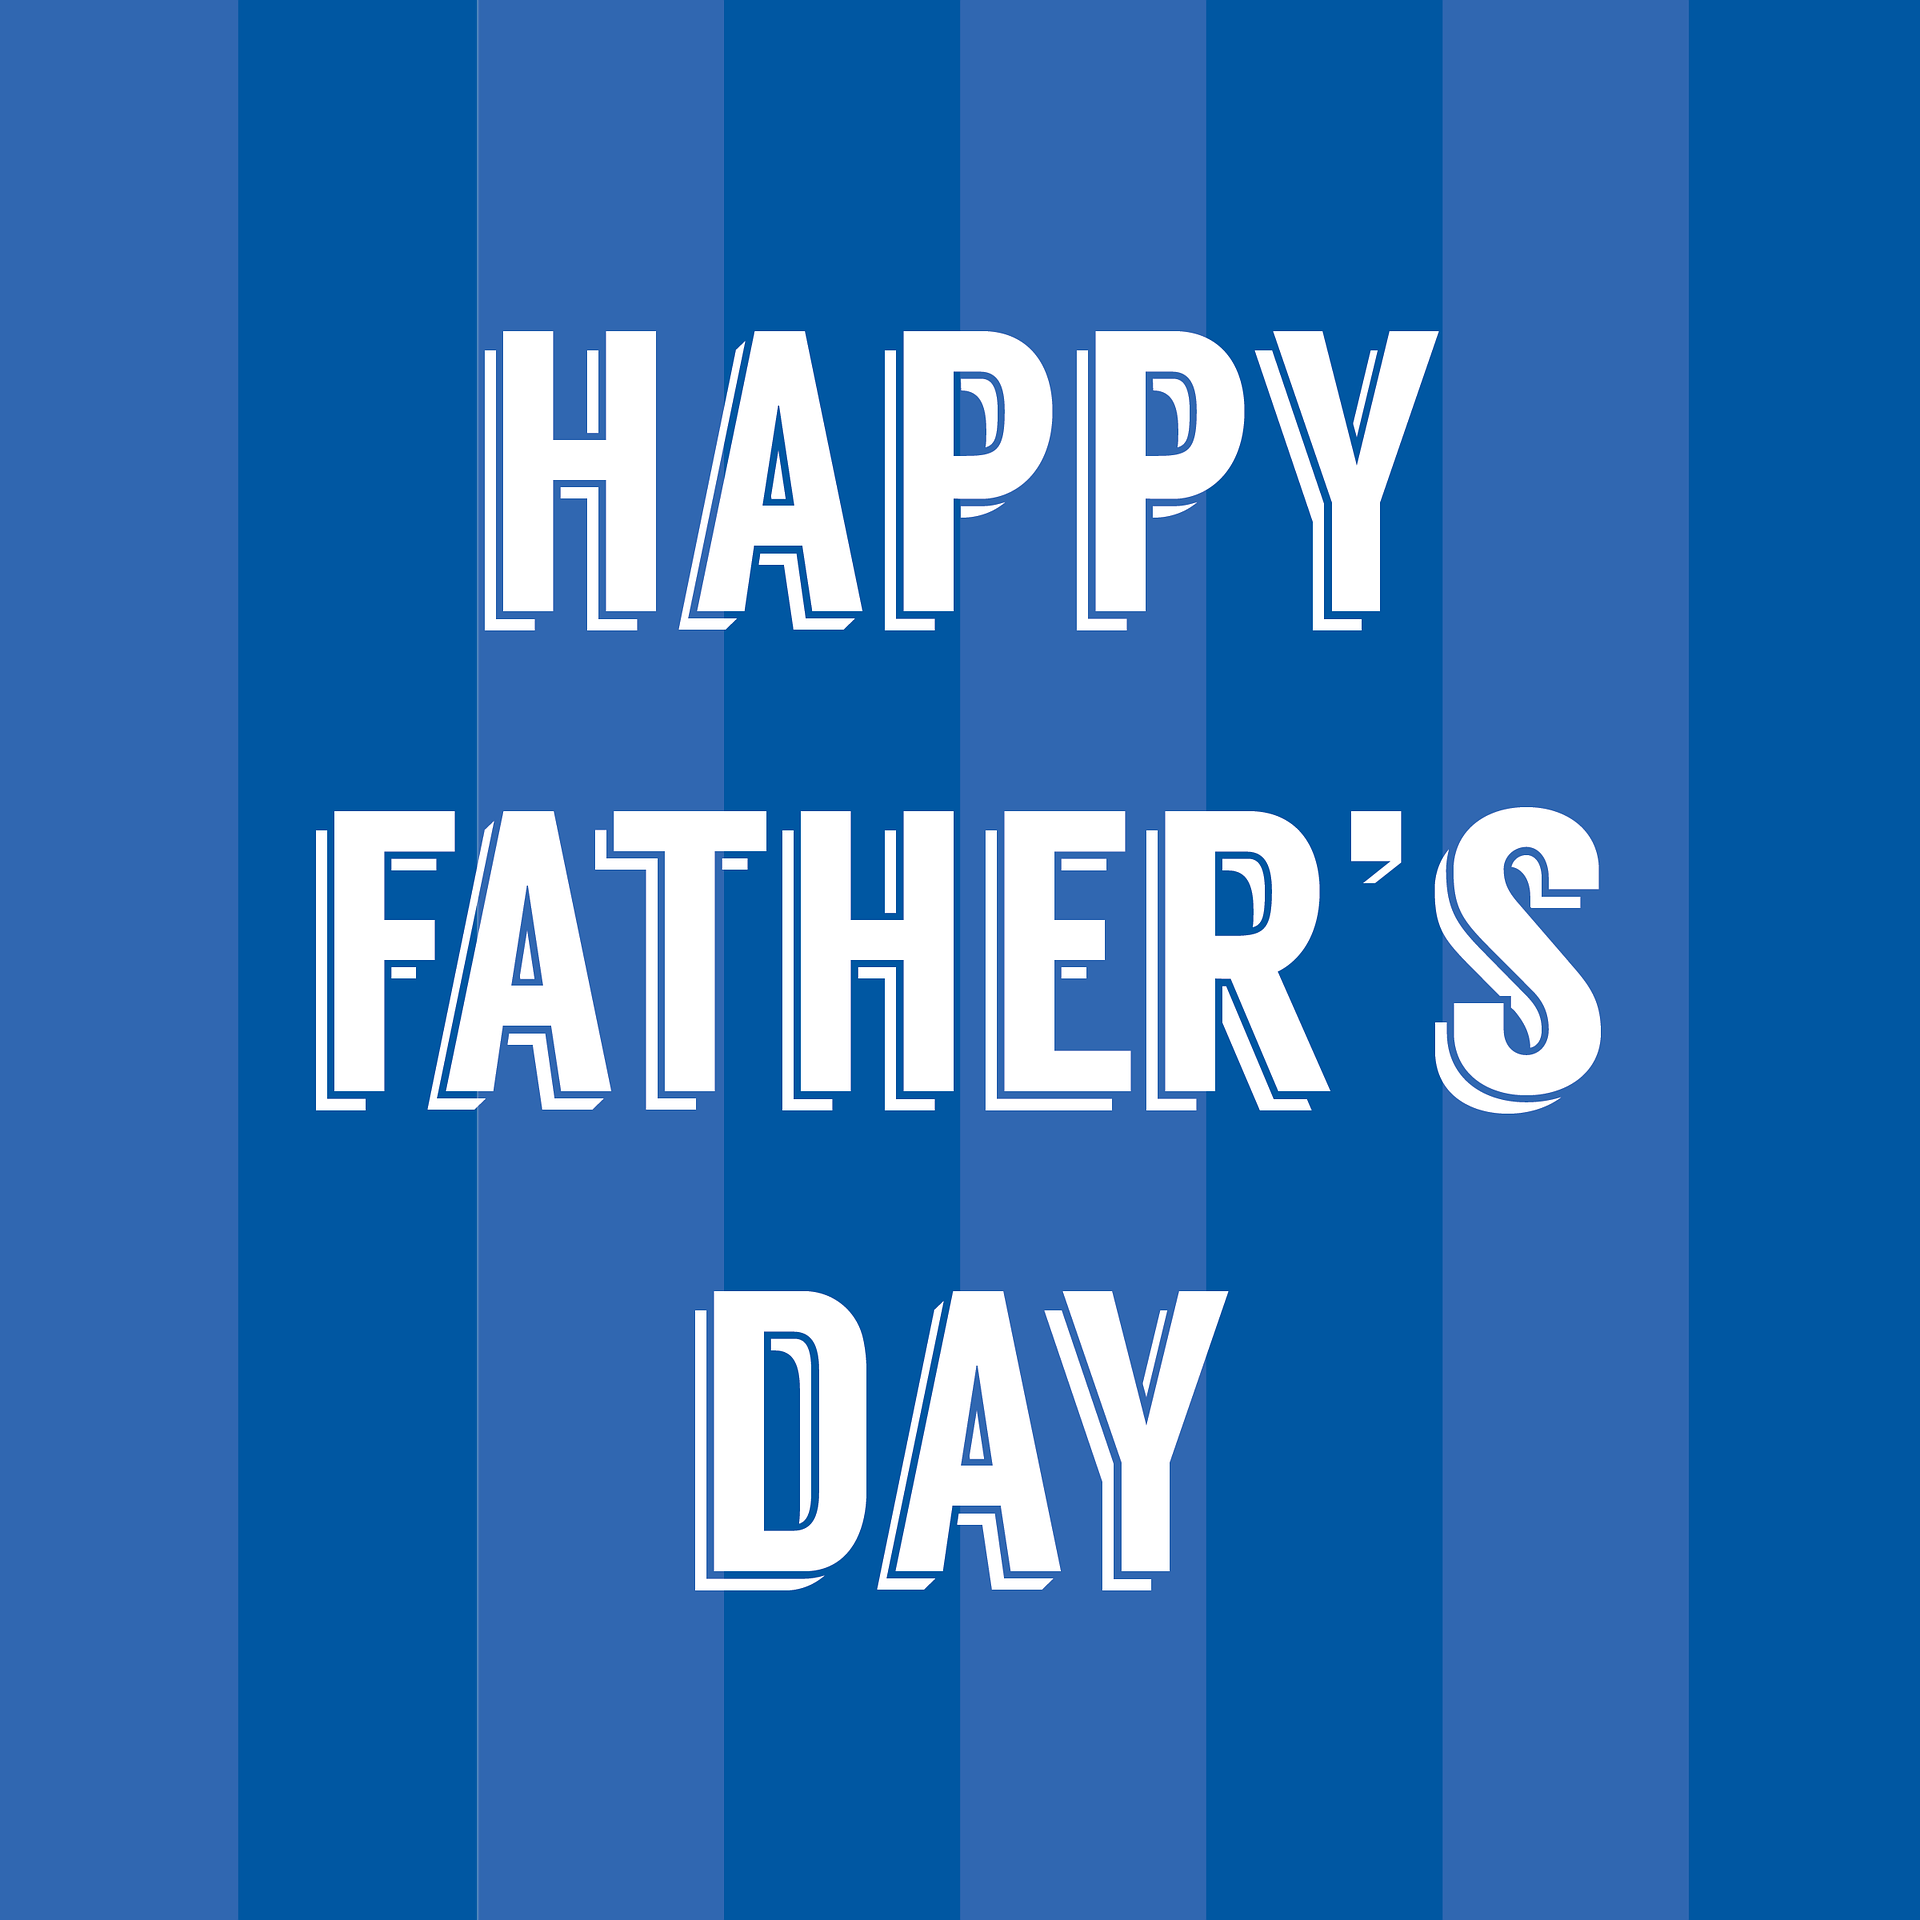 White text on a blue background: Happy Father's Day